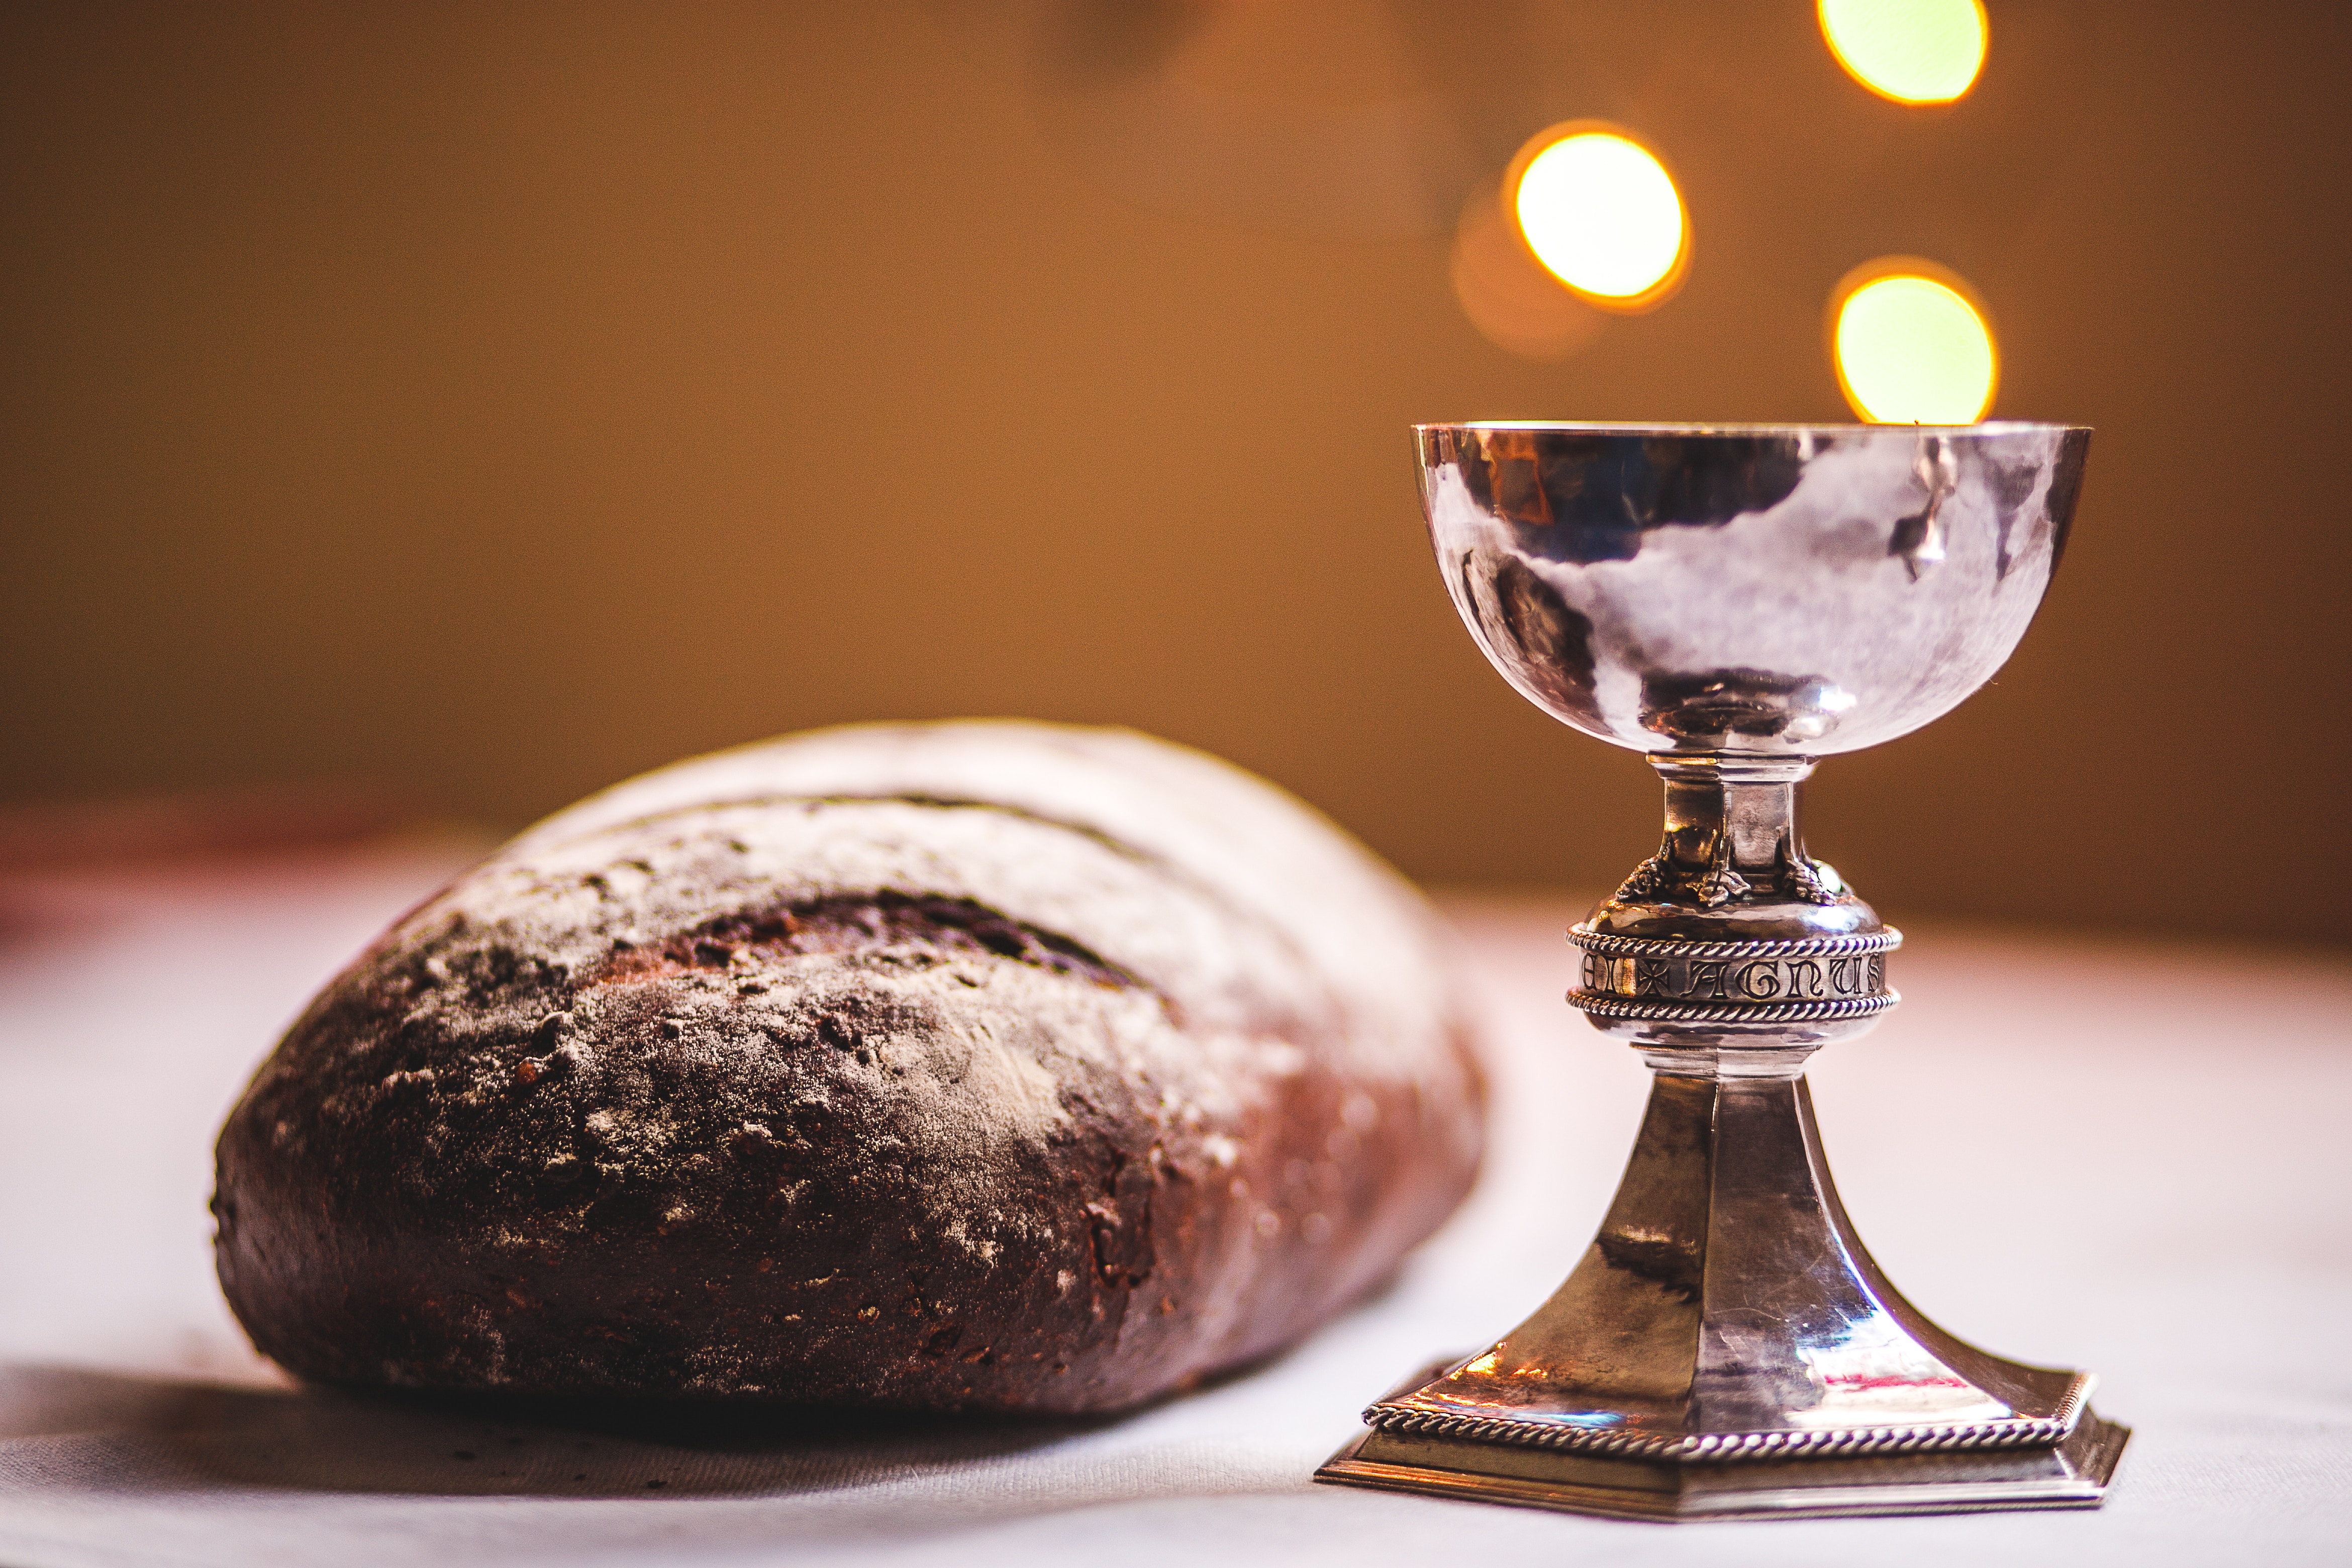 Bread, Cups, and God’s Sustaining Grace